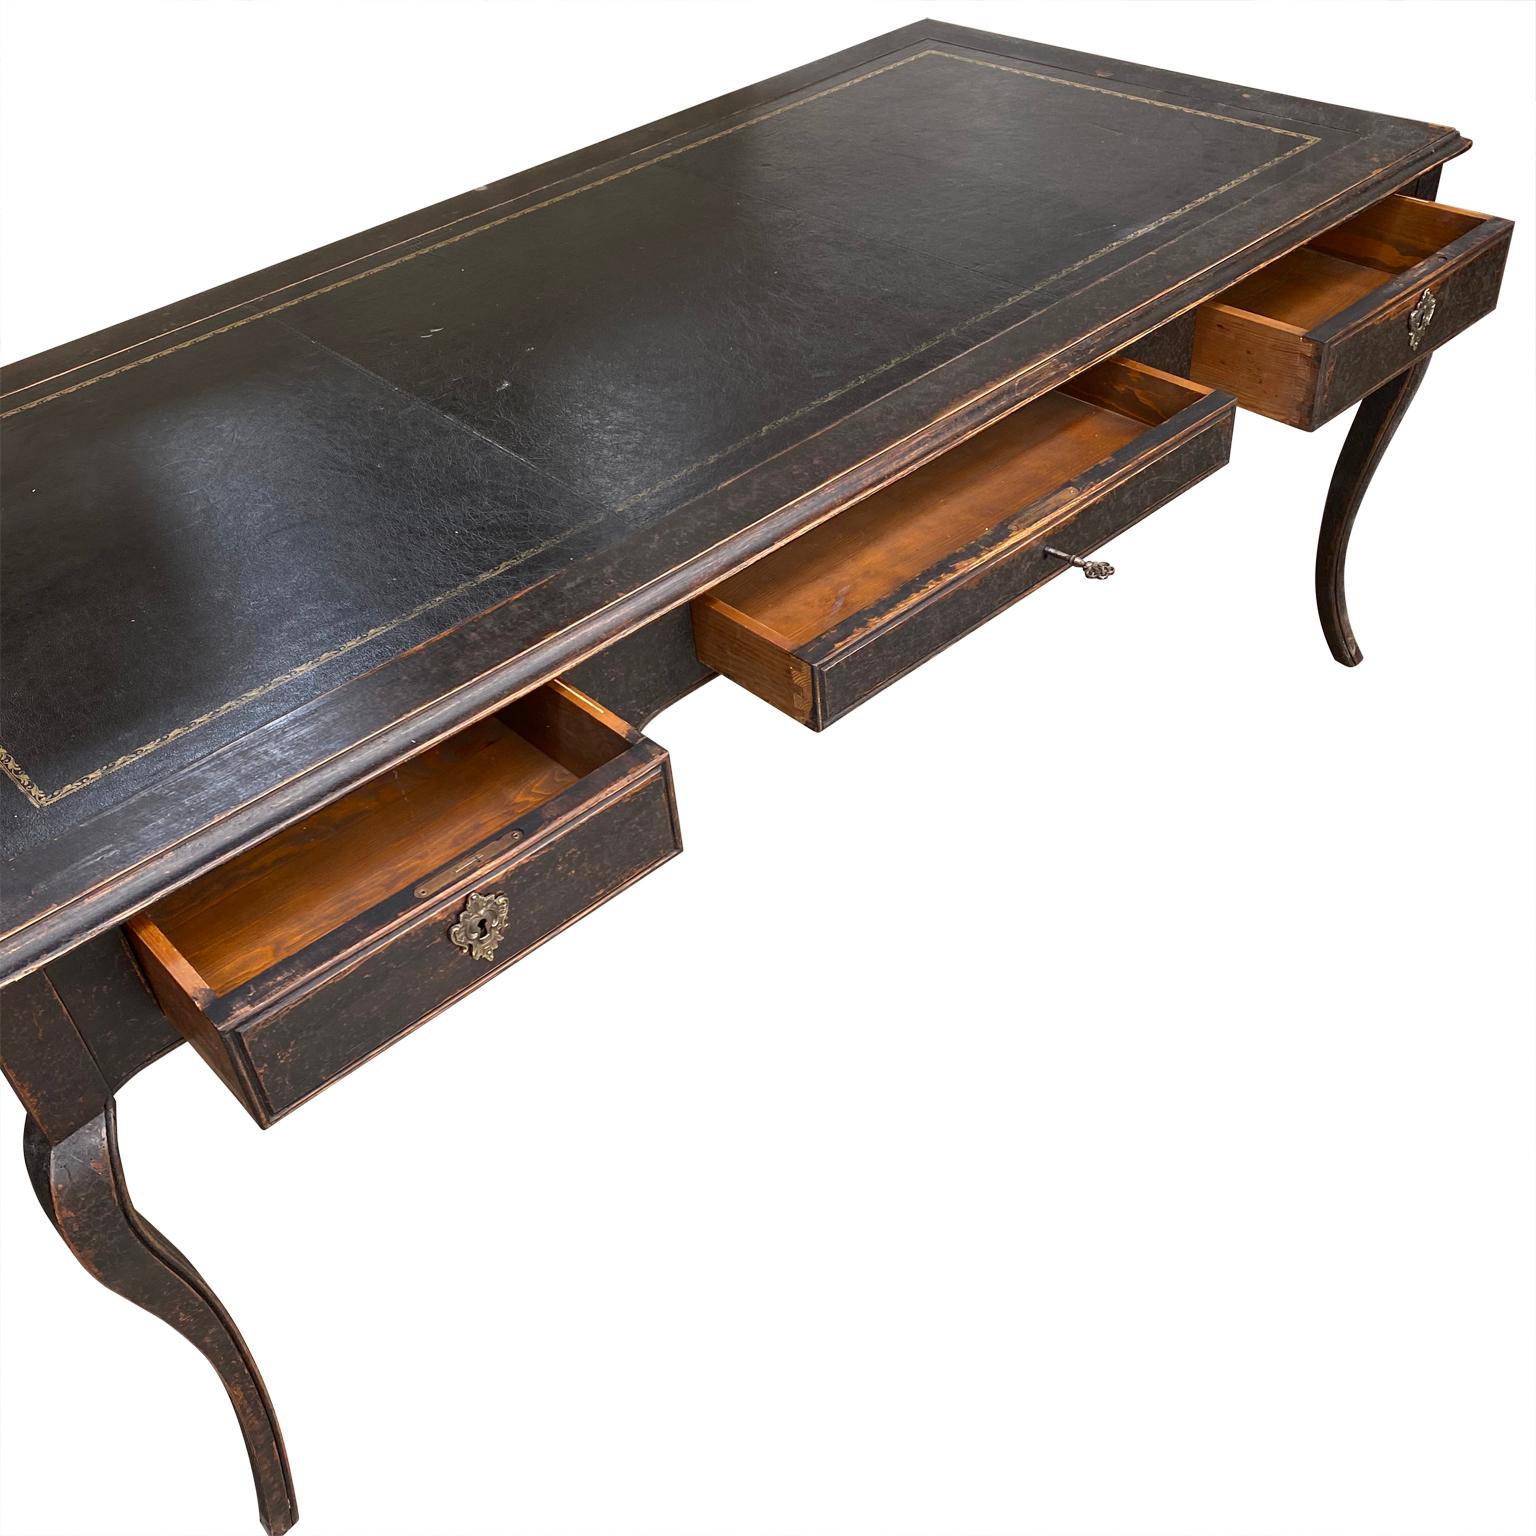 Large Swedish Gustavian black painted faux partners writing desk with three drawers

Desk has the original brass hardware and key.
Seat height is 23.75 inches.